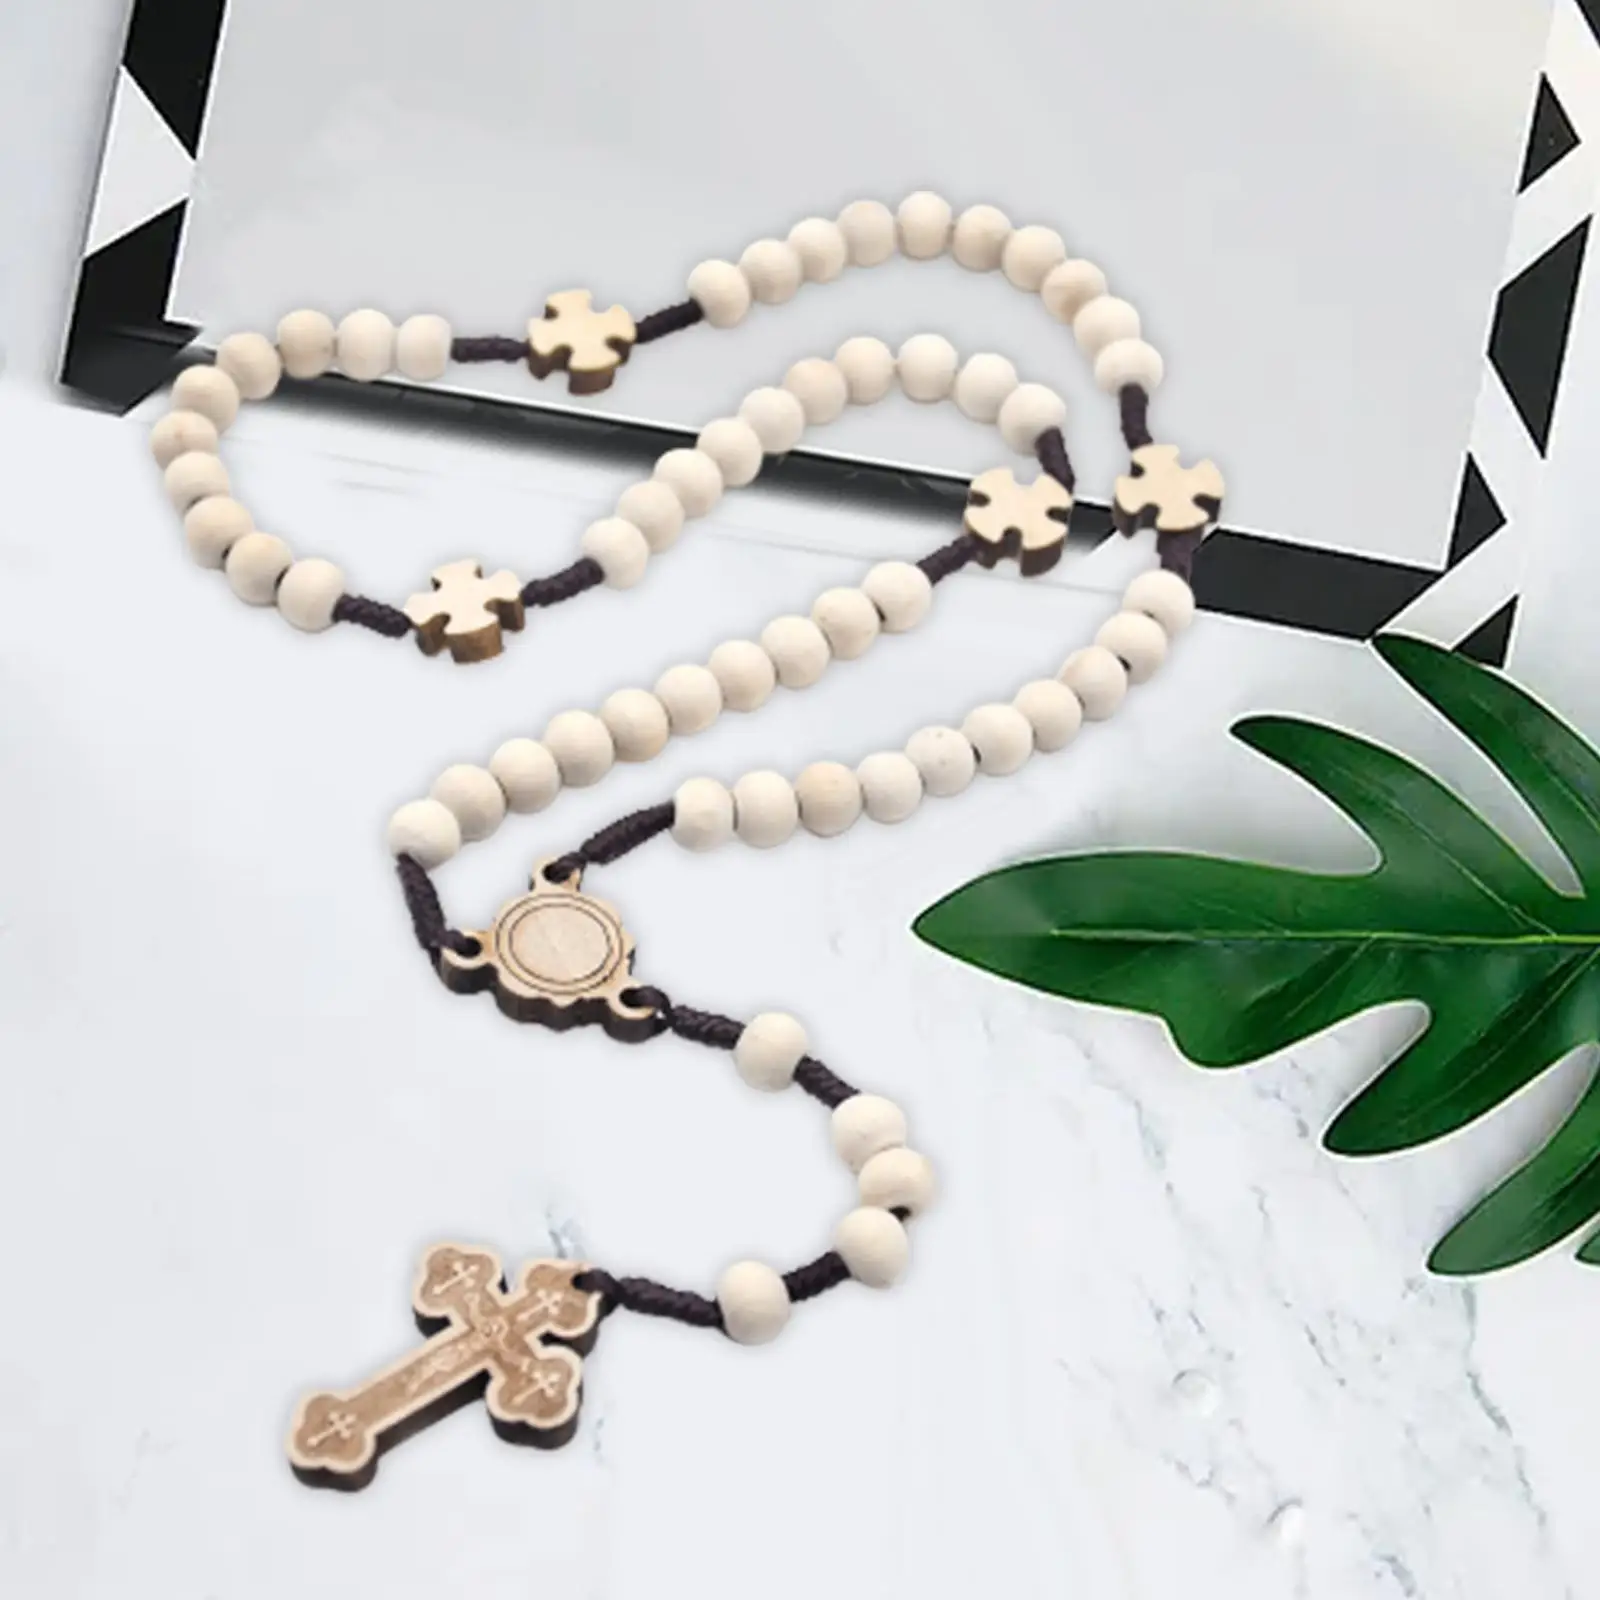 Rosary Cross Pendant Necklace Decorative Chain with Crucifix Gift Jewelry for Christmas Women Men Mother Day Wedding Birthday